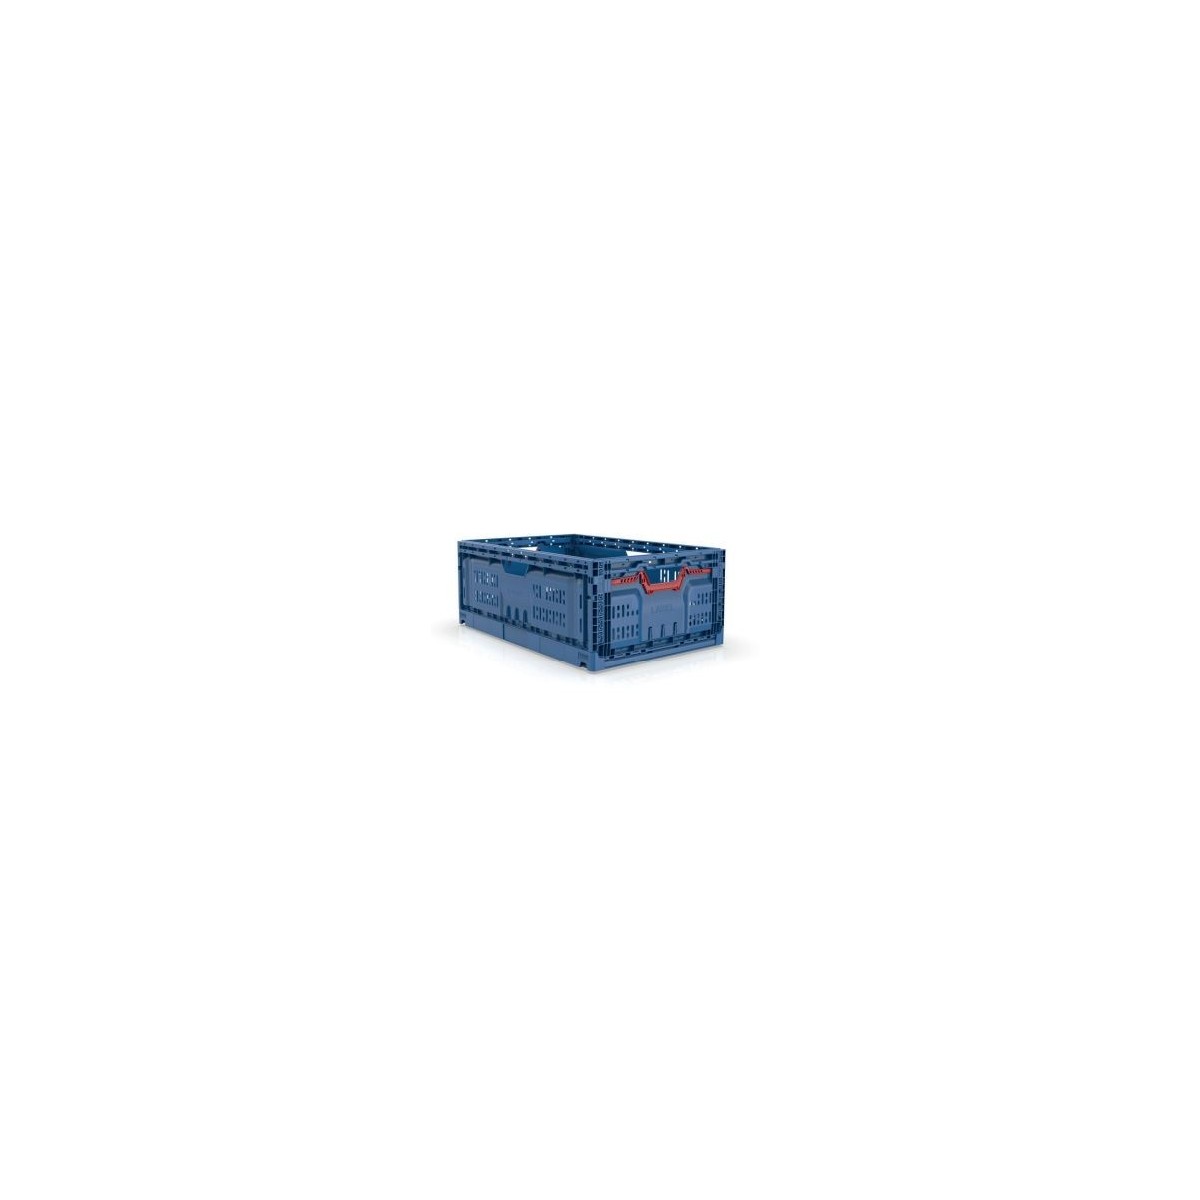 FOLDING CONTAINER EURONORM 60X40X23CM BLUE PERFORATED VOLUME 45L